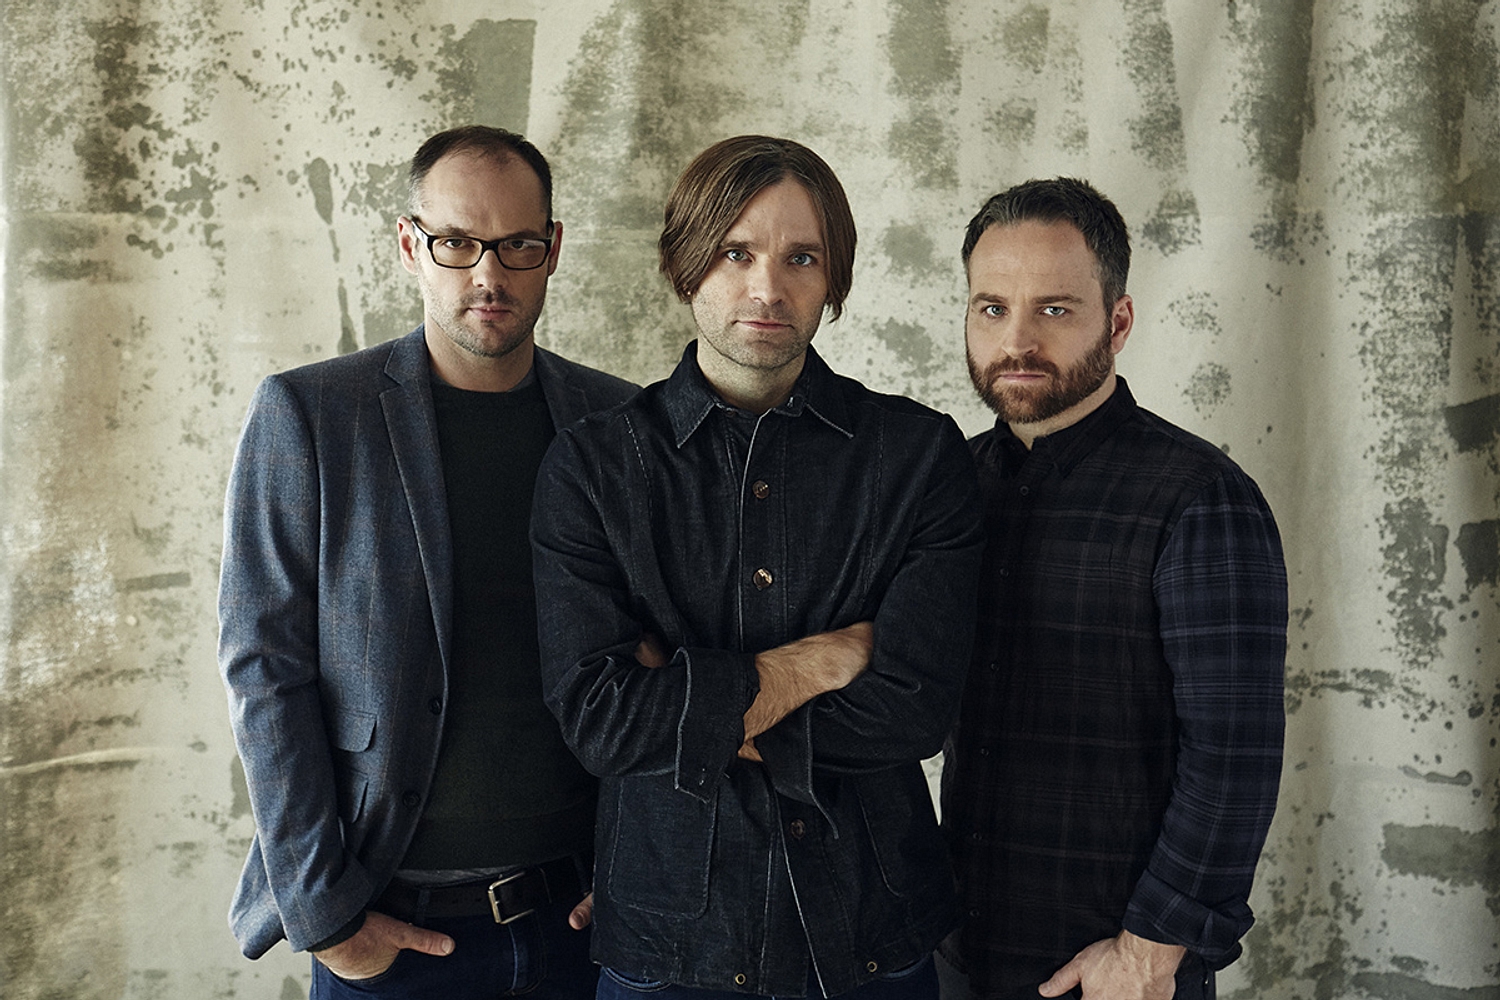 Death Cab For Cutie say their shows will always be a “safe place”